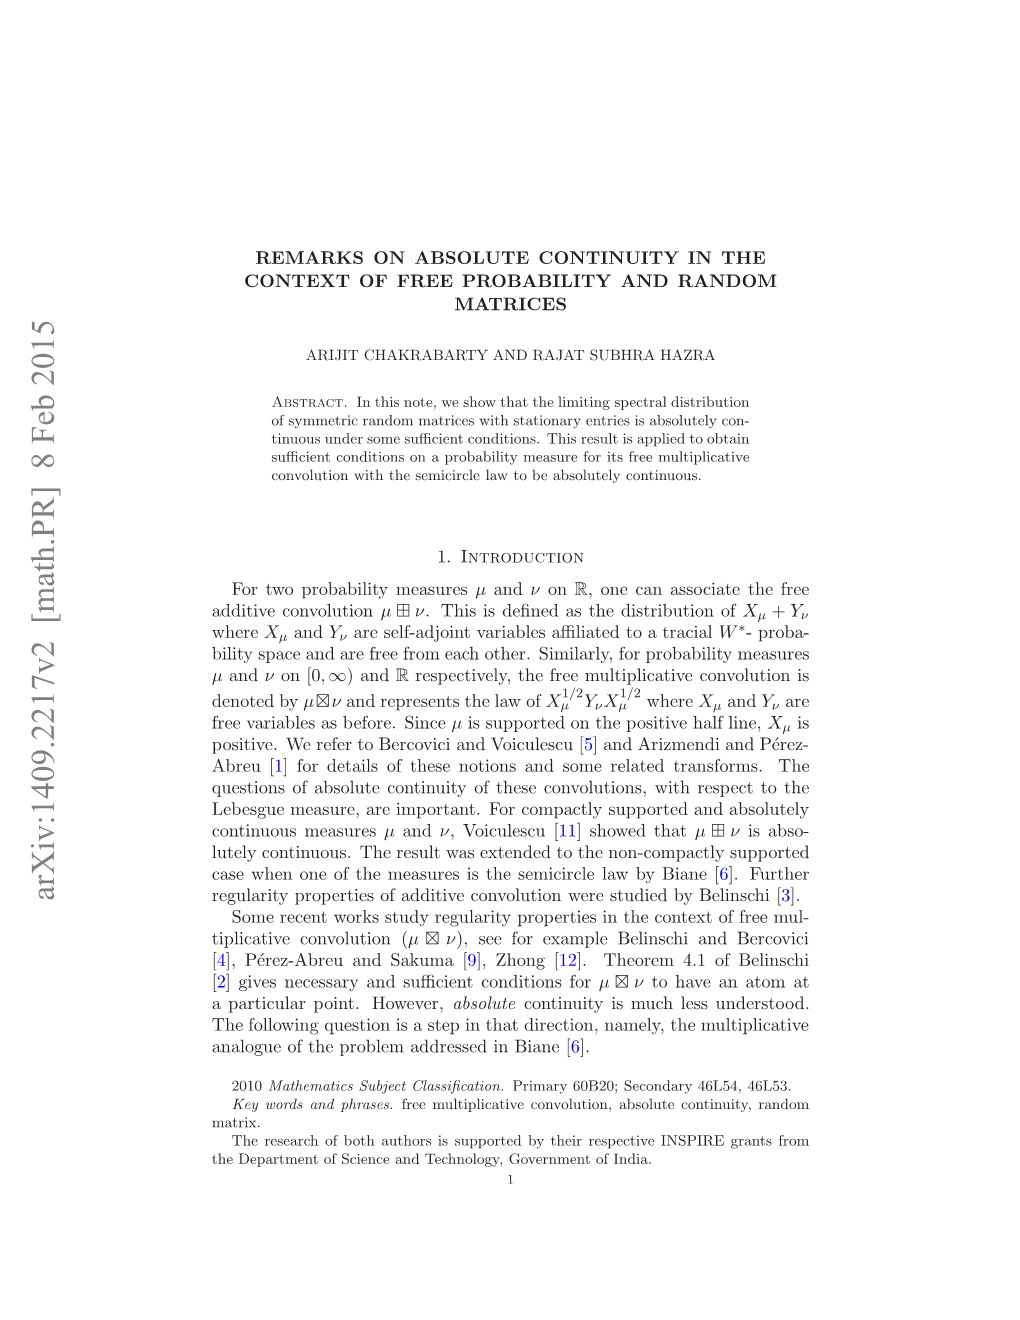 Remarks on Absolute Continuity in the Context of Free Probability And